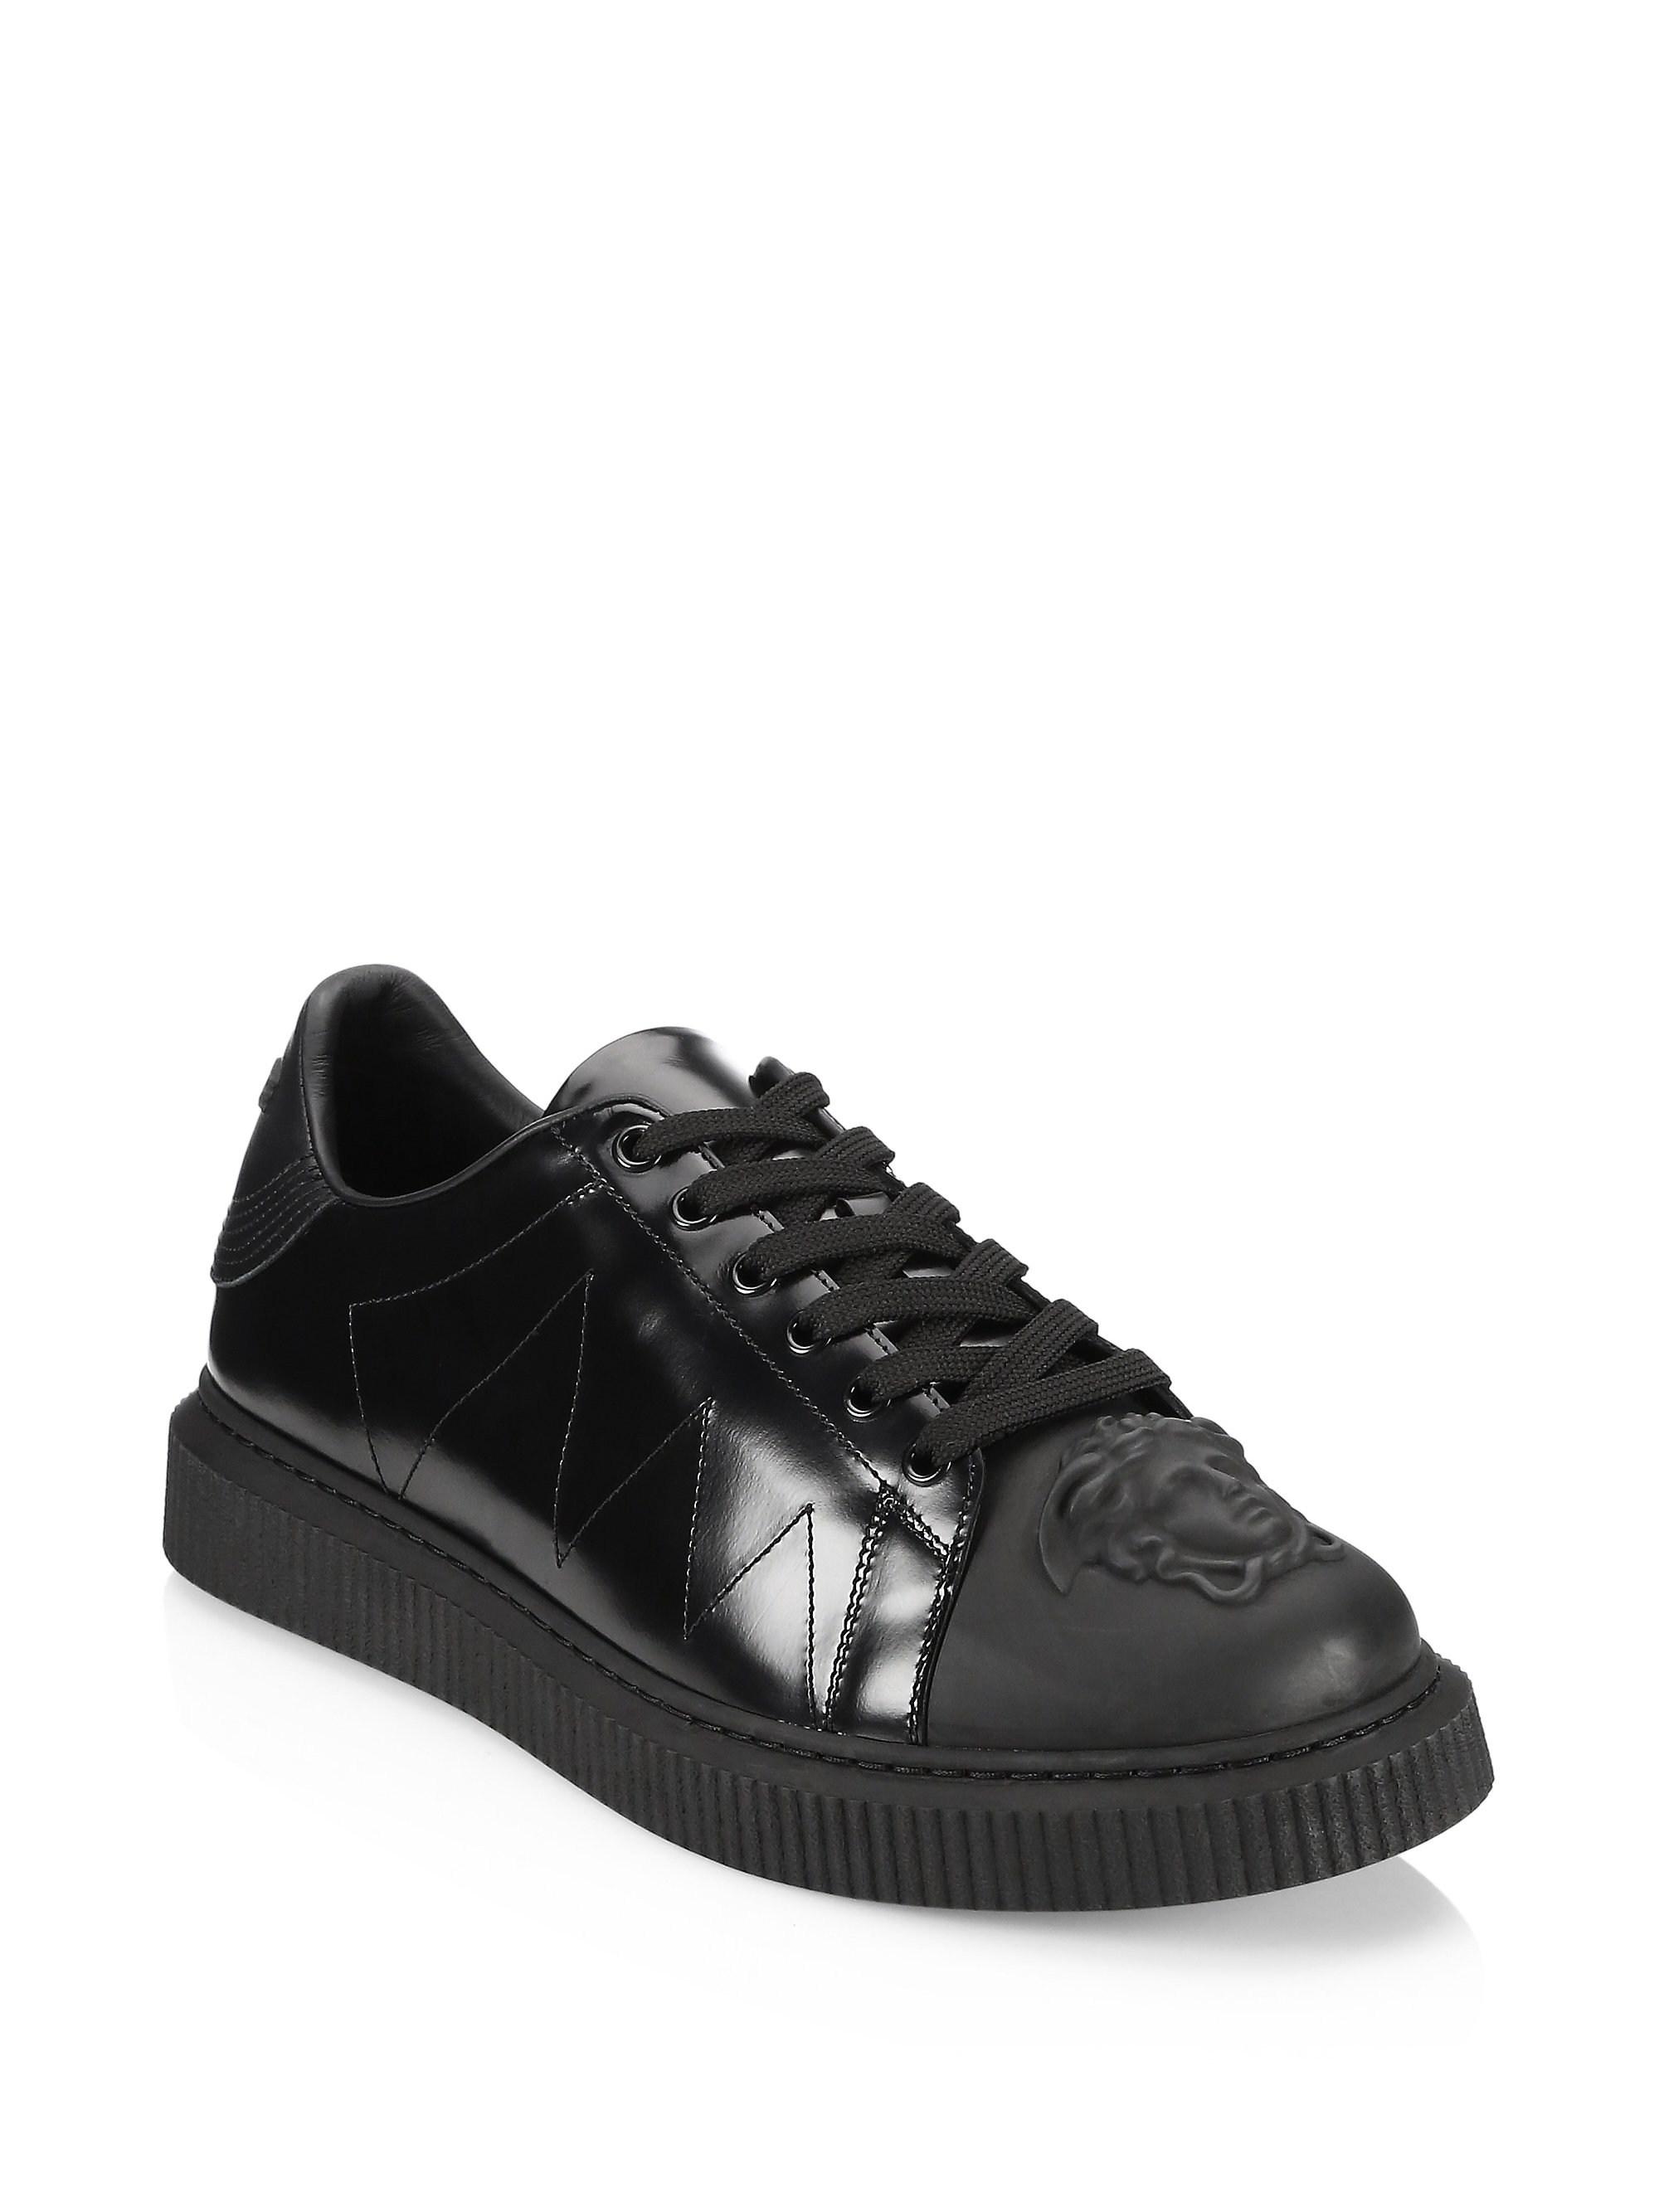 Versace Medusa Leather Nyx Sneakers in Black for Men - Lyst